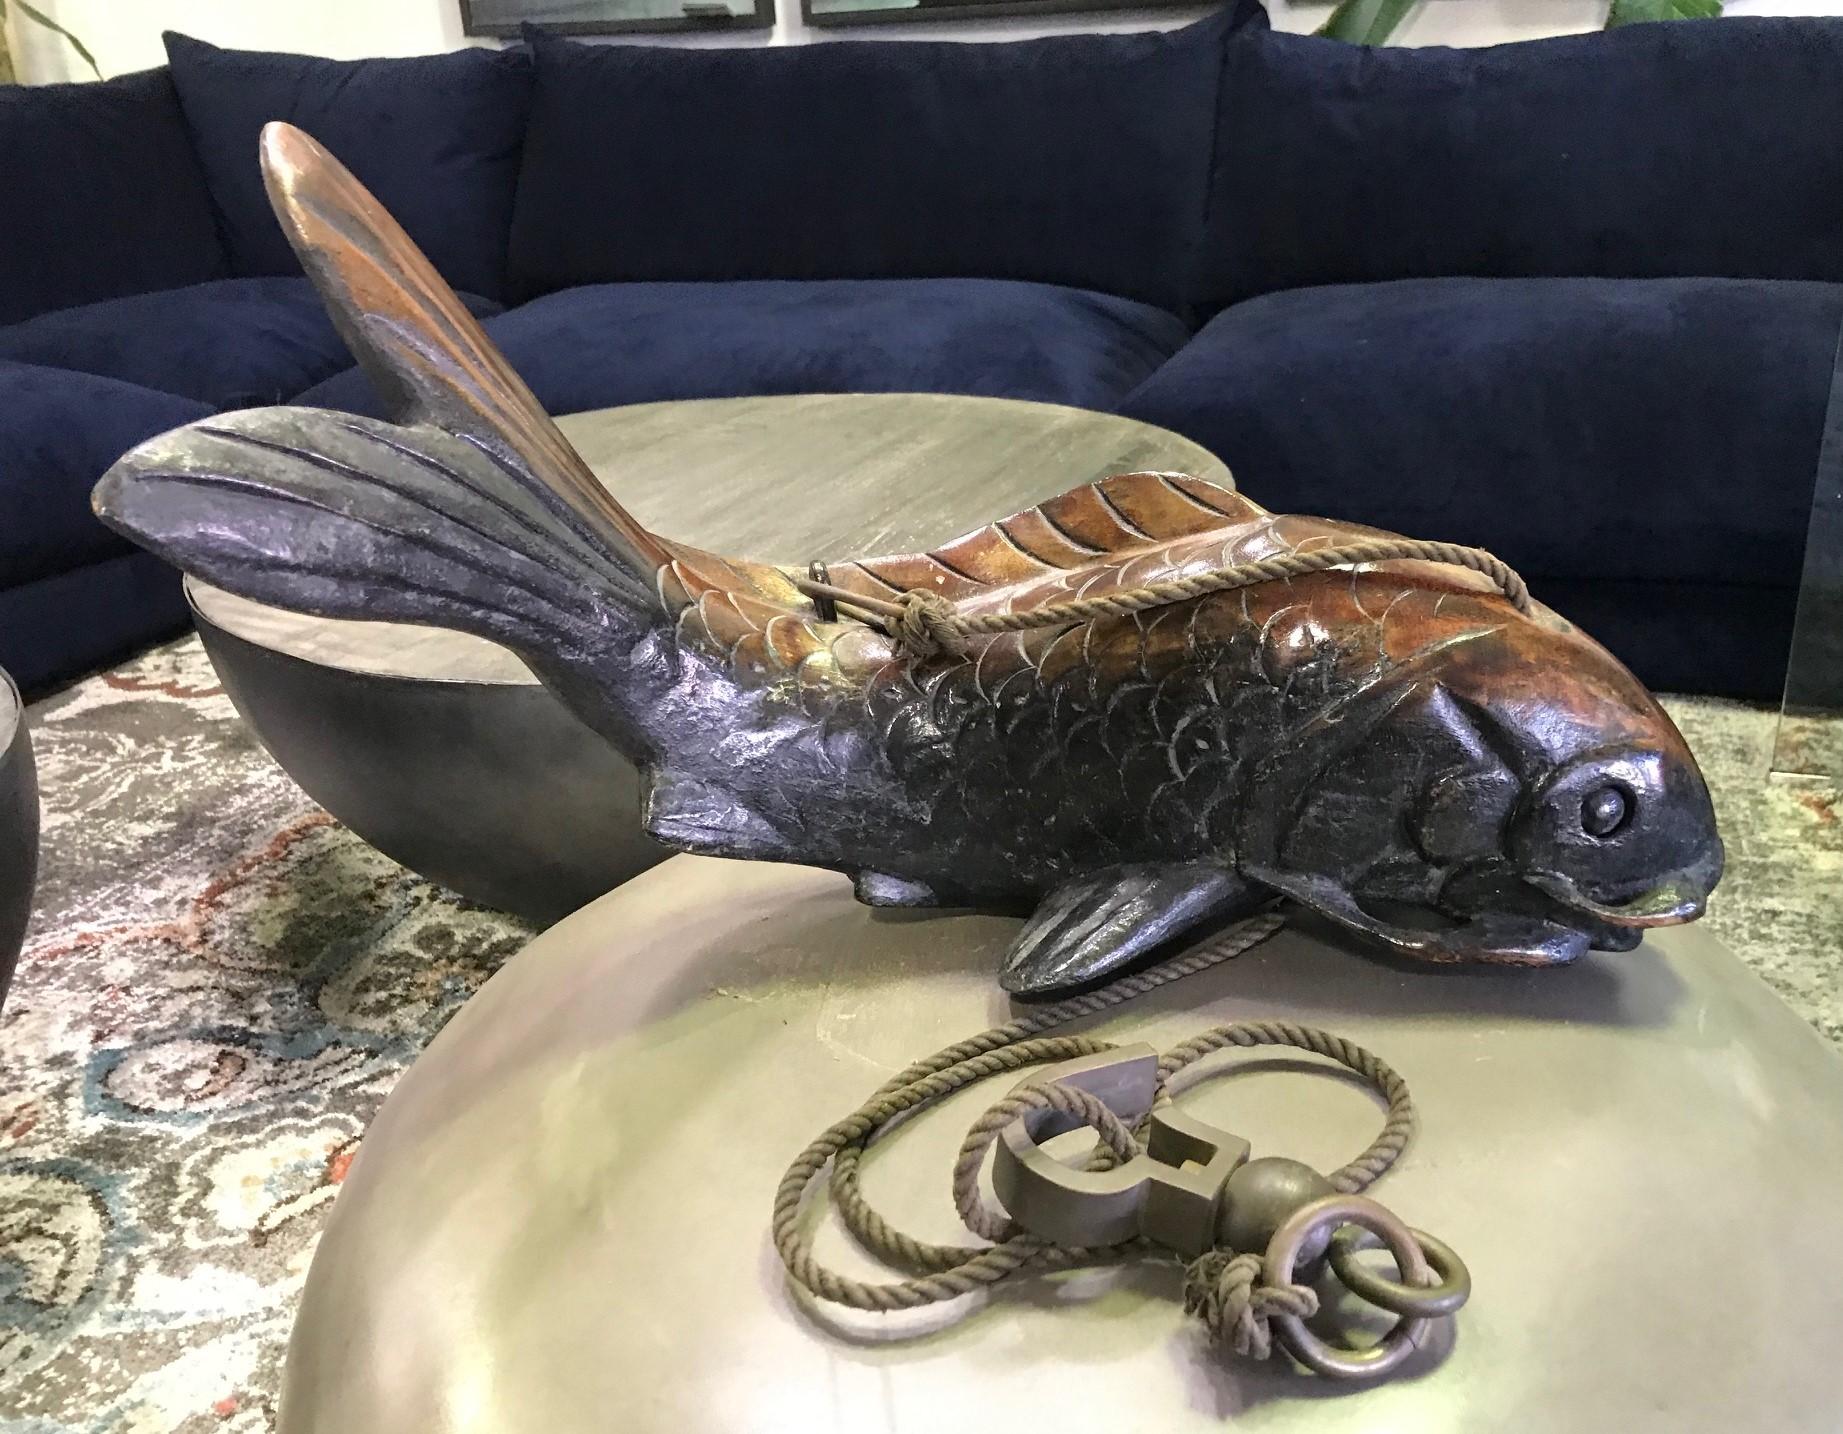 A wonderfully carved old Japanese Koi fish, a symbol of prosperity, perseverance, and good fortune. The sculpture retains its original dark, rich patina. Traditionally, these works were often displayed in Japanese main living rooms, suspended with